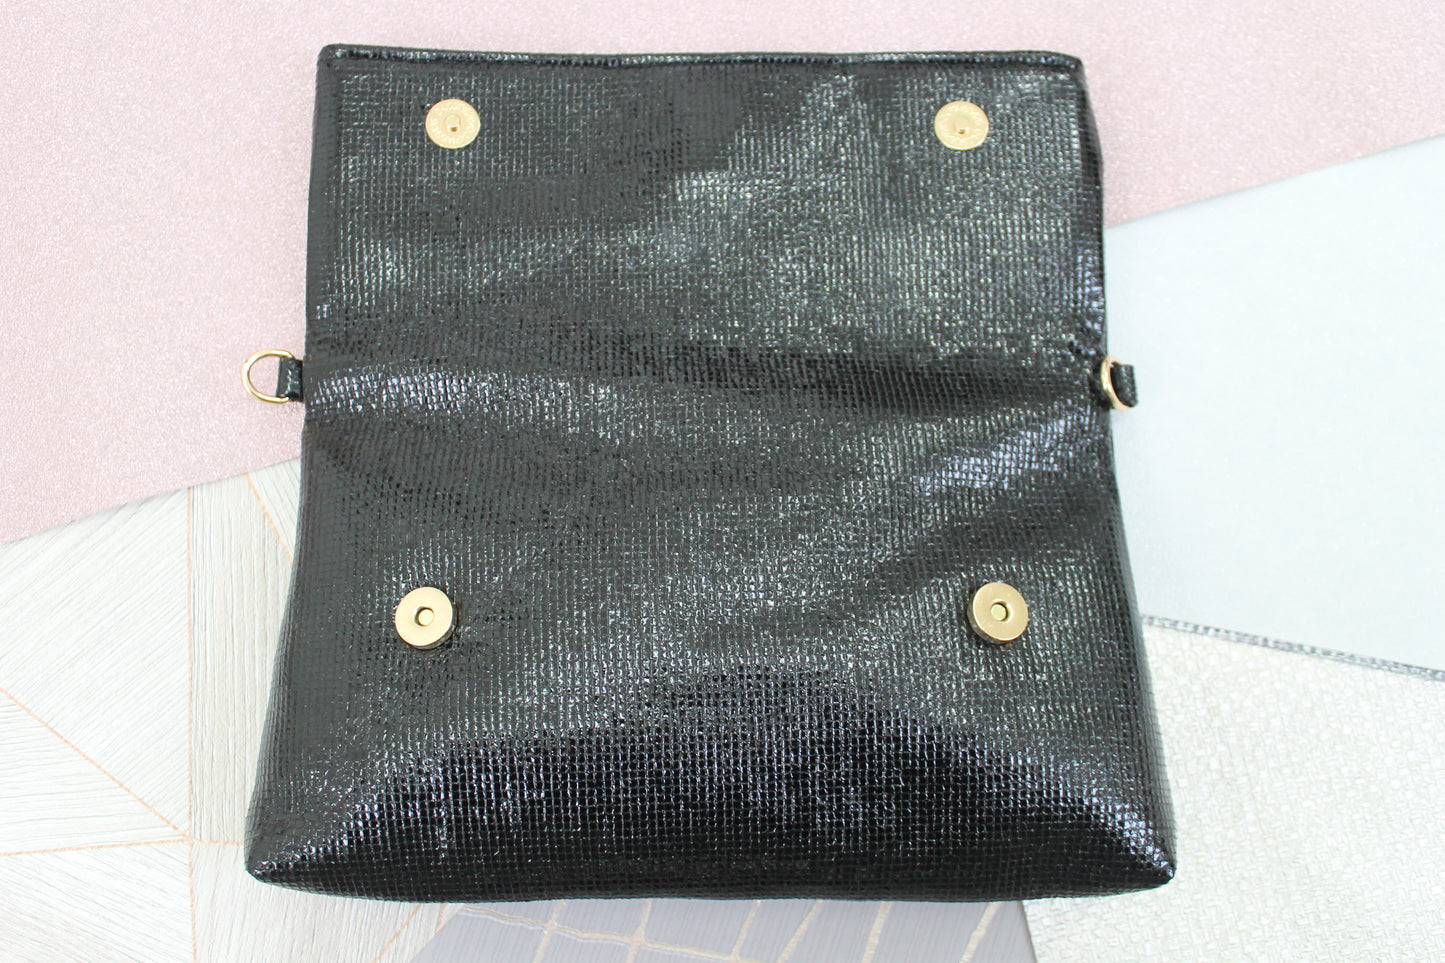 Tess Glamour Party Clutch Bag Black